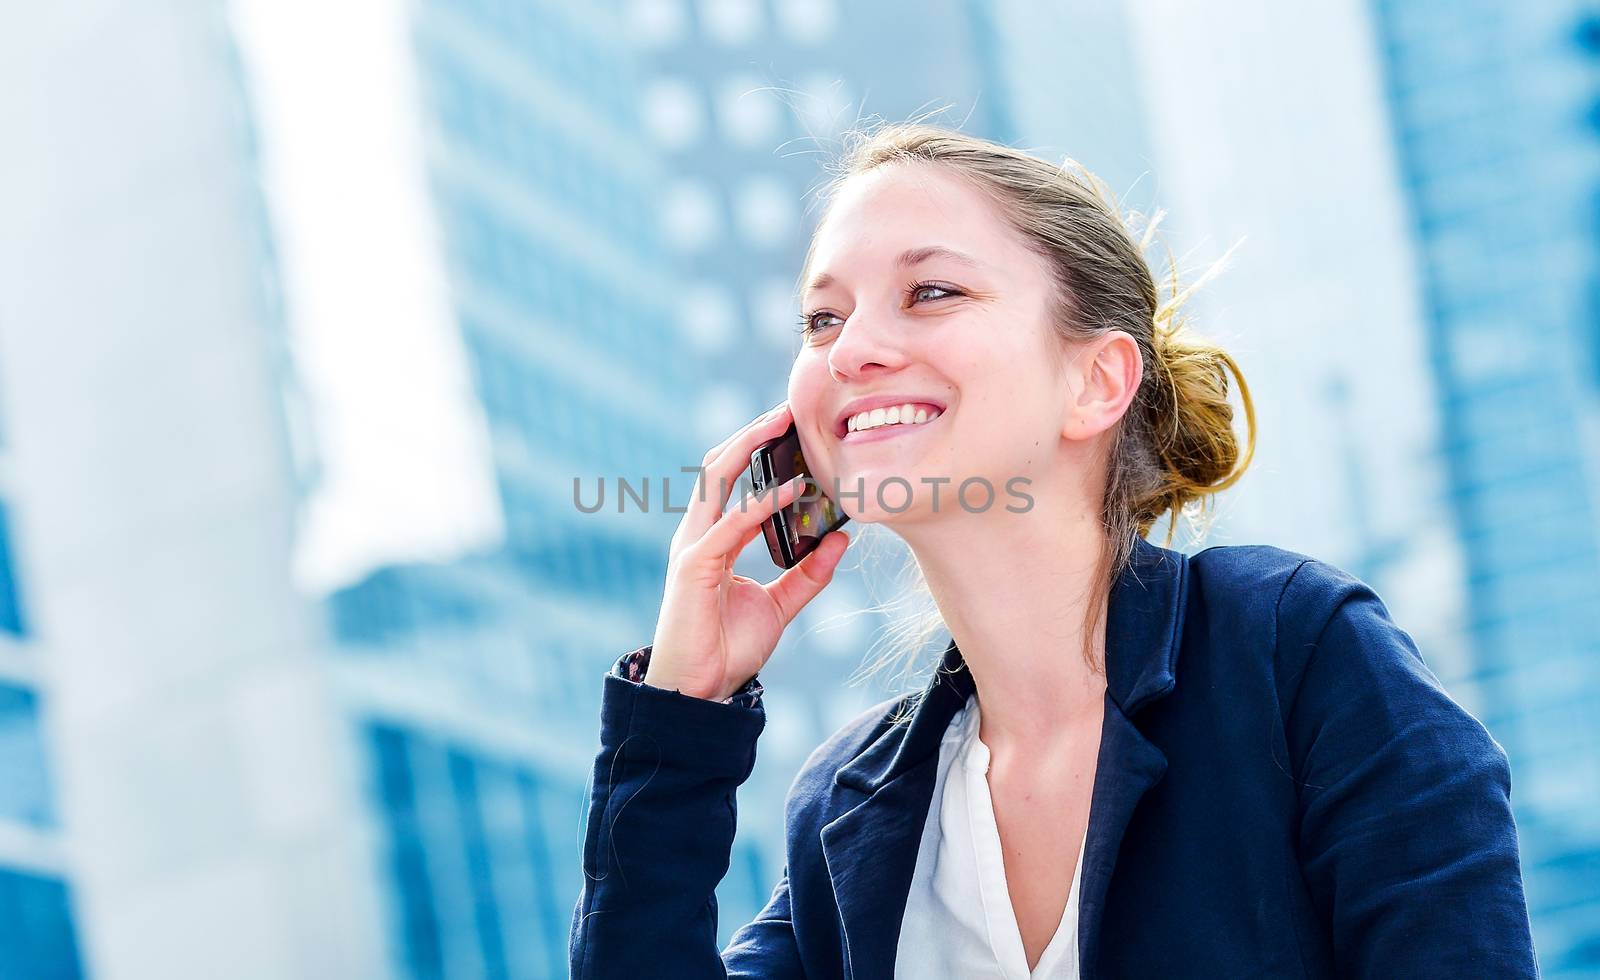 dynamic young executive calling outside, free of any constraint. Symbolizing a job search or a trade of outsourcing